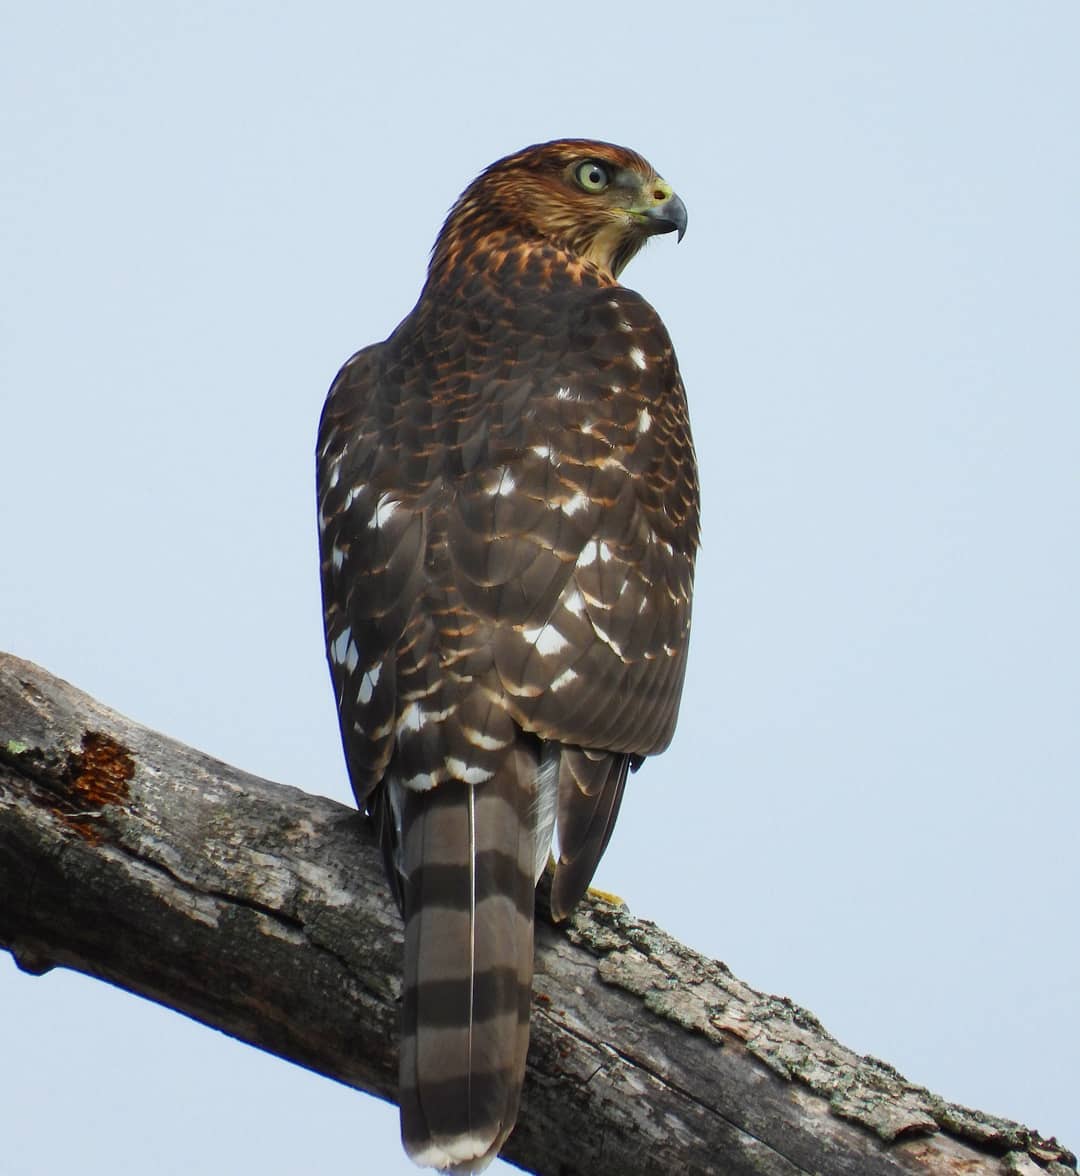 Juvenile Coopers hawk by minx267